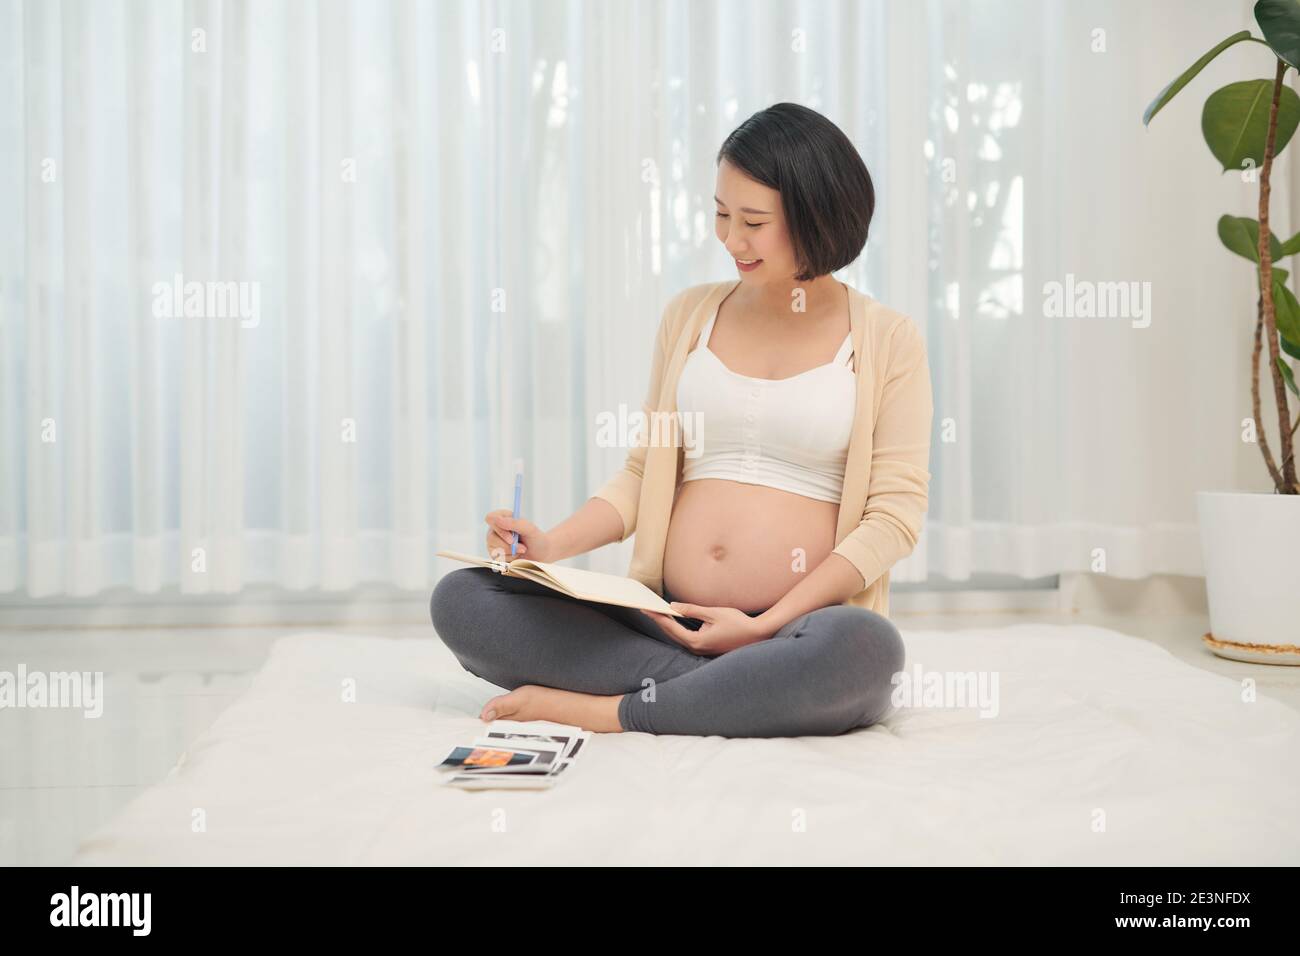 regnant woman lie down looking at a sonogram ultrasonography picture of her unborn baby Stock Photo